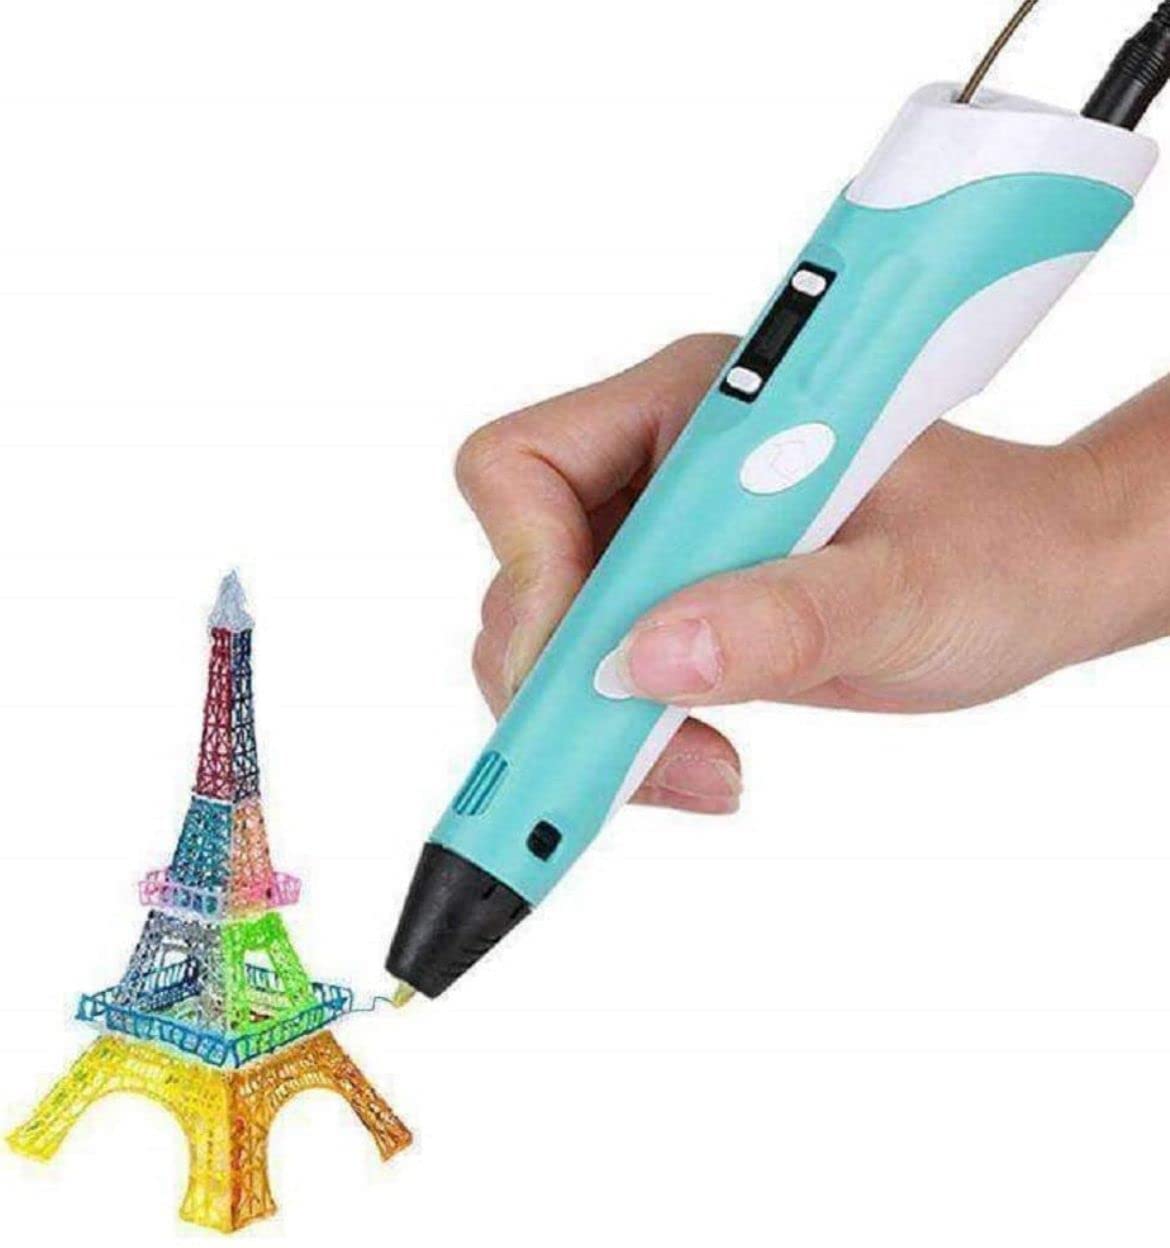 3D Pen (With Display)